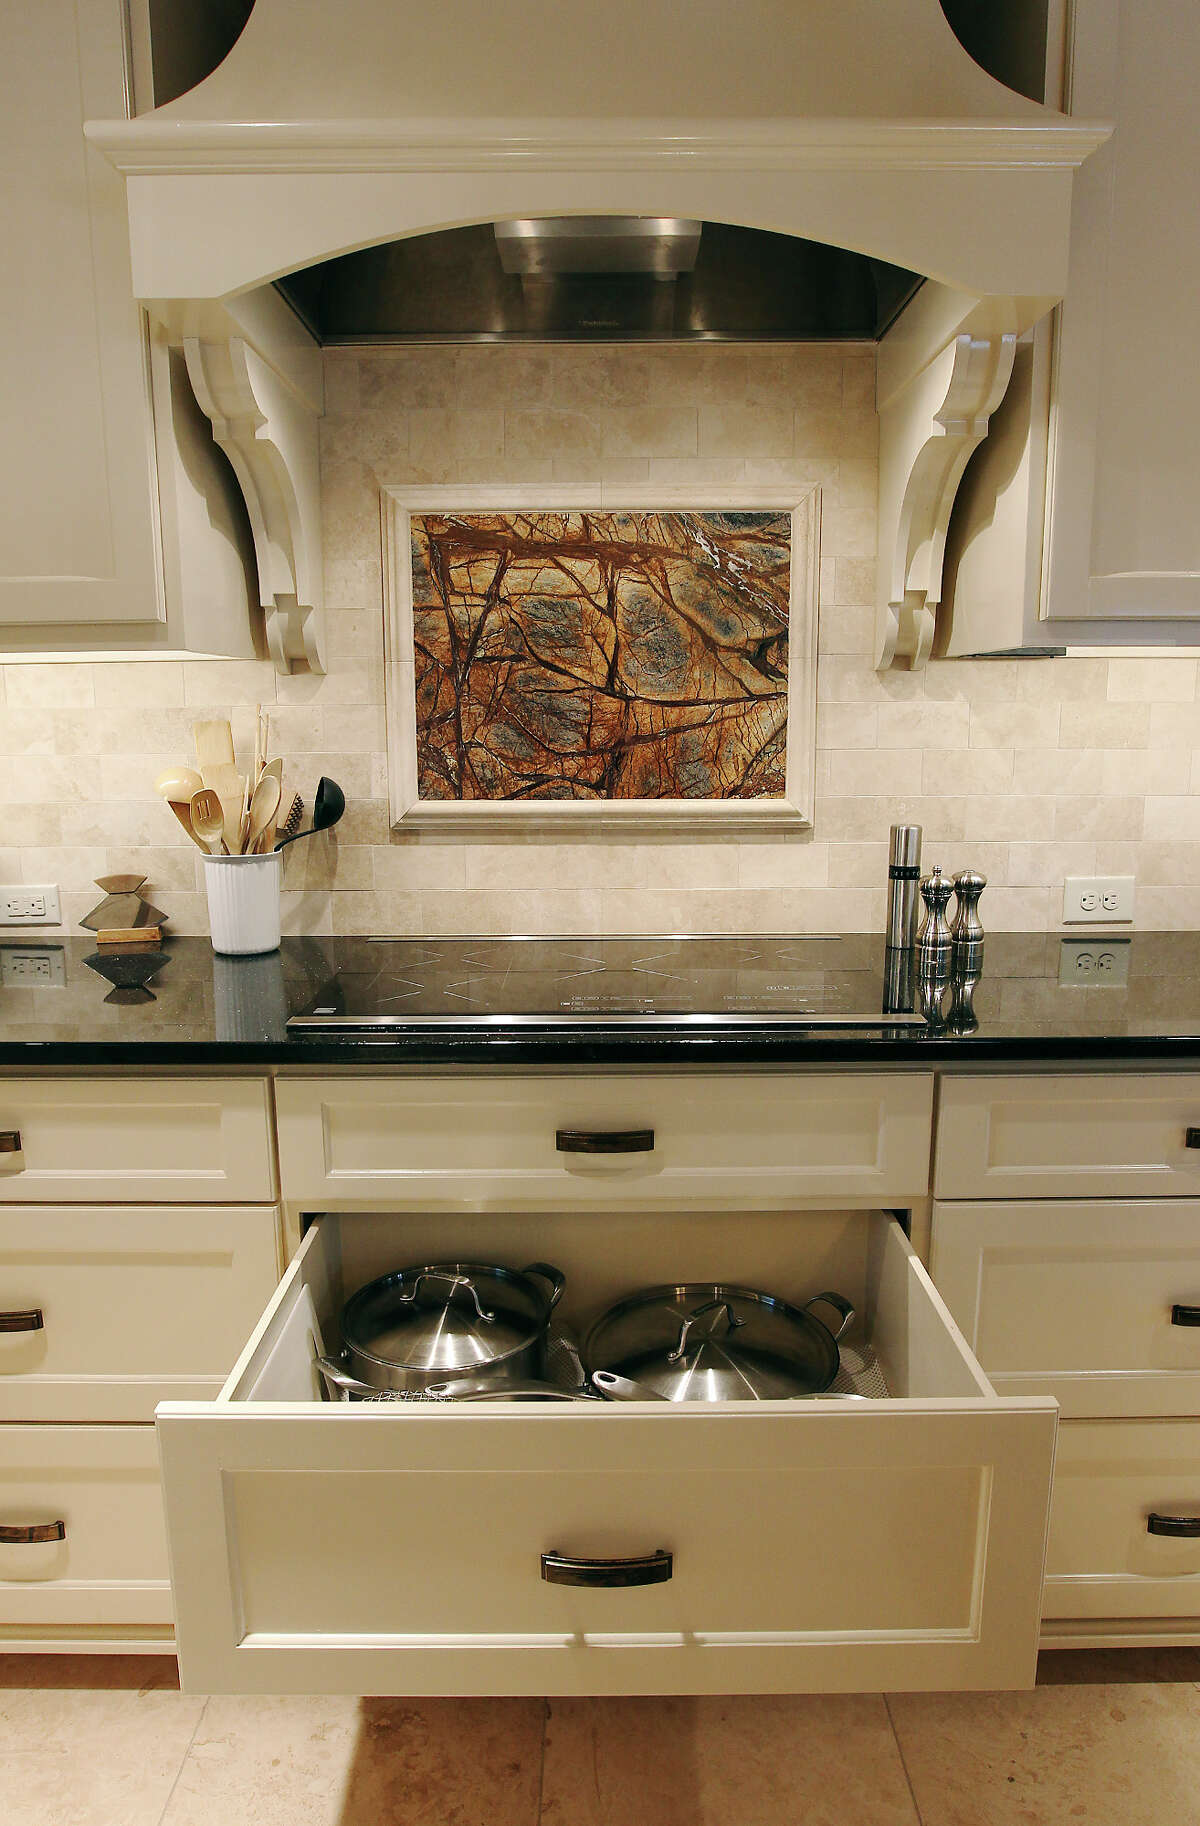 Linda and Bill Blanton's newly remodeled kitchen in Pleasanton, Texas on Tuesday, Nov. 27, 2012. Under the electric range top are drawers for the Blantons to store pots and pans. On the back splash is a granite insert that matches the kitchen island.